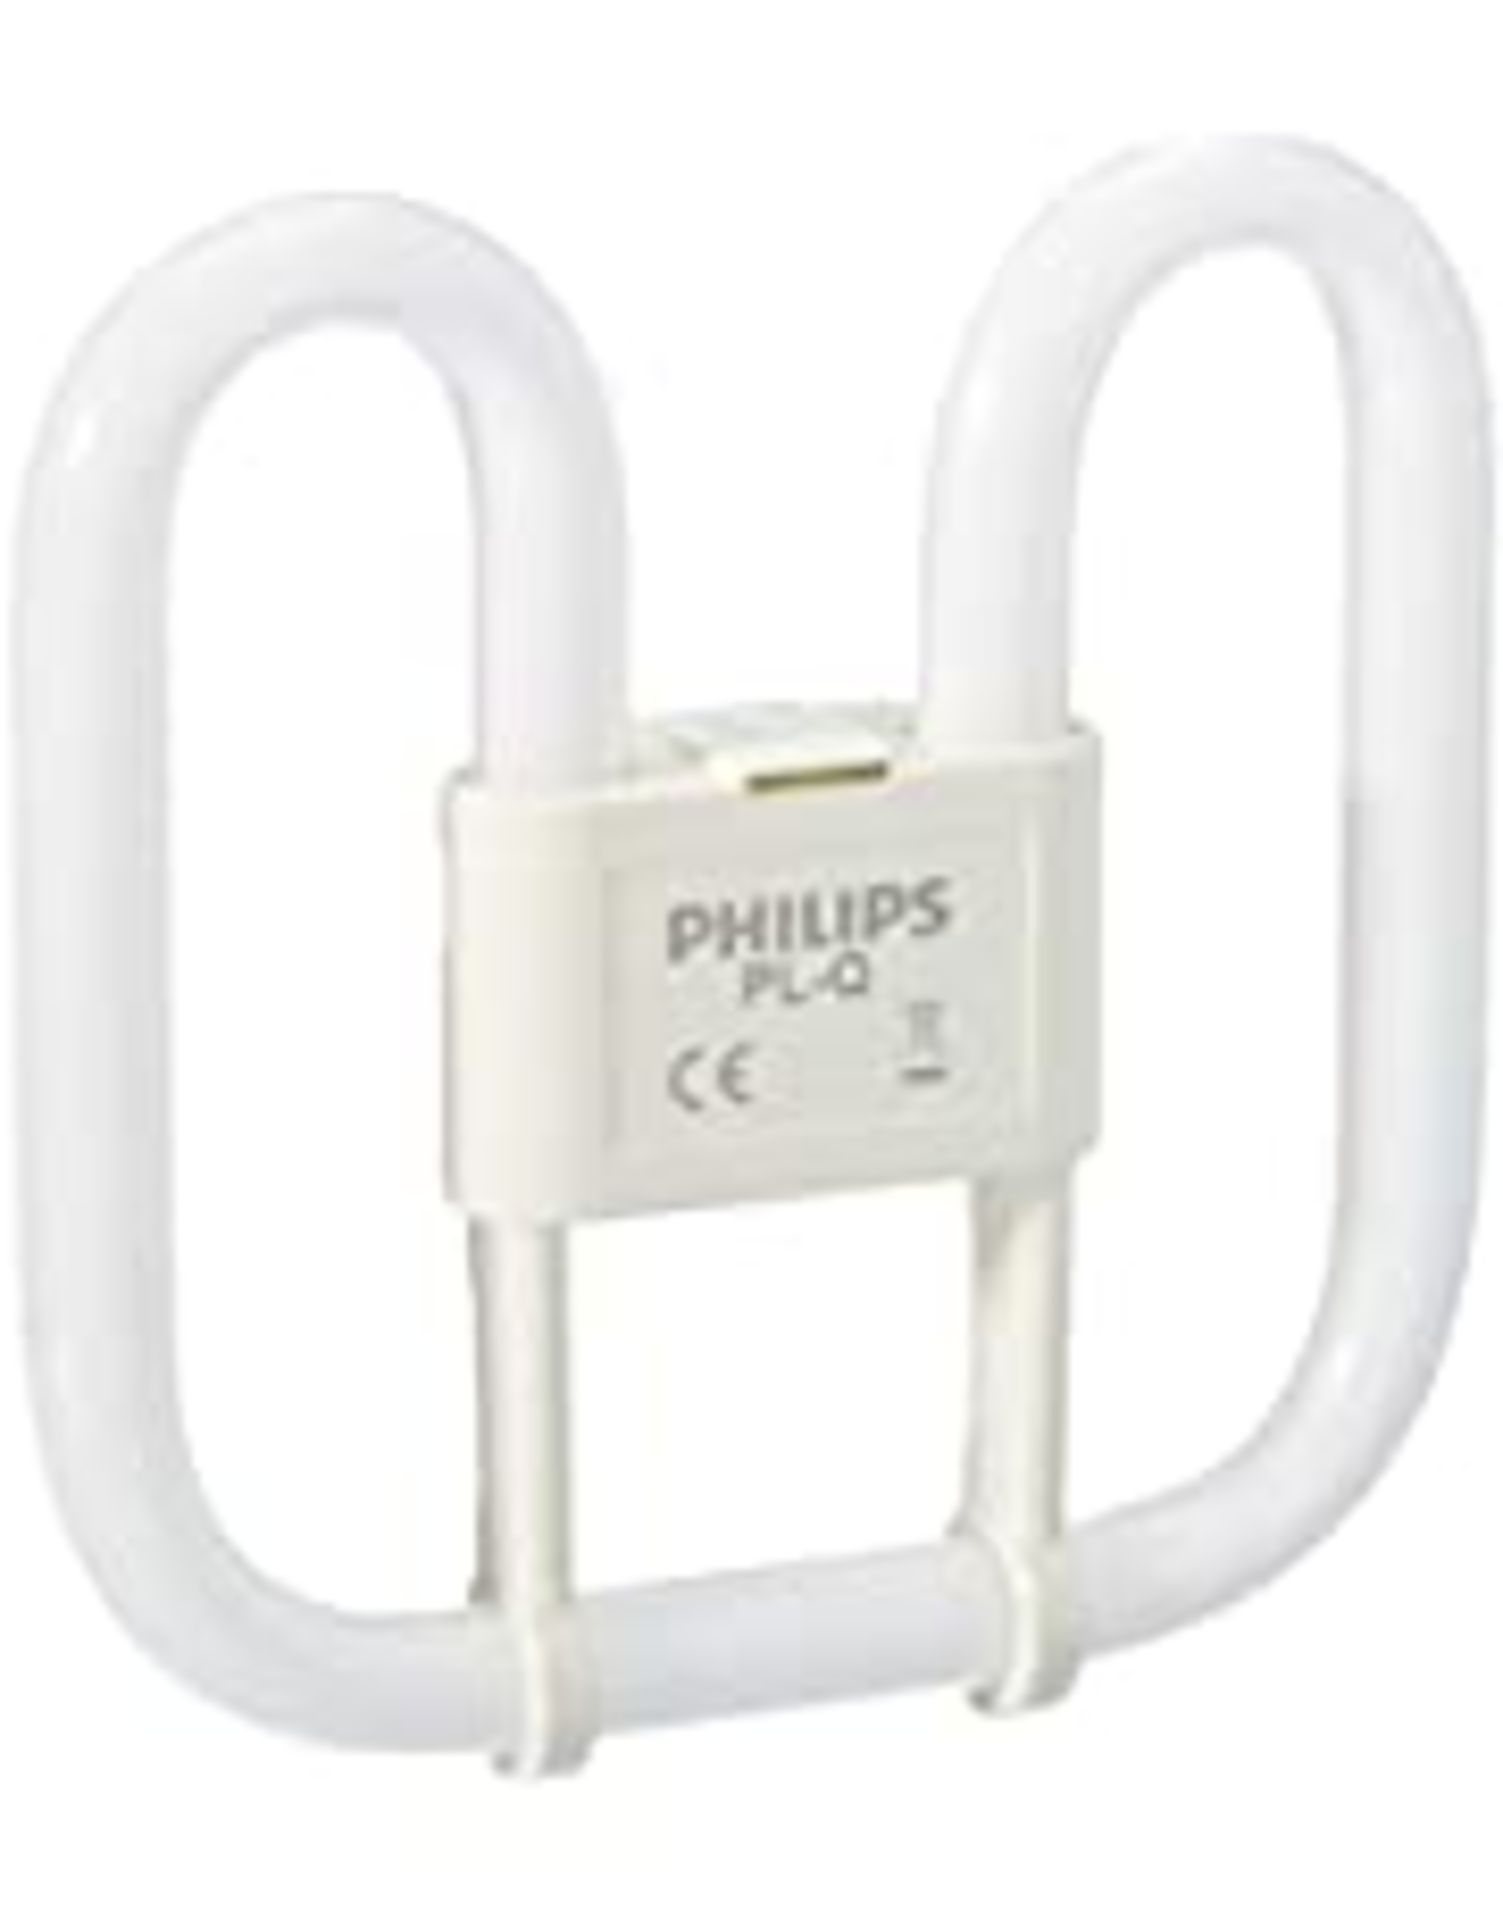 RRP-£8 Philips PL-Q GR10Q 4 Pin Compact Lamp 28W/830/4P - Fluorescent (Check Wattage and Pins Carefu